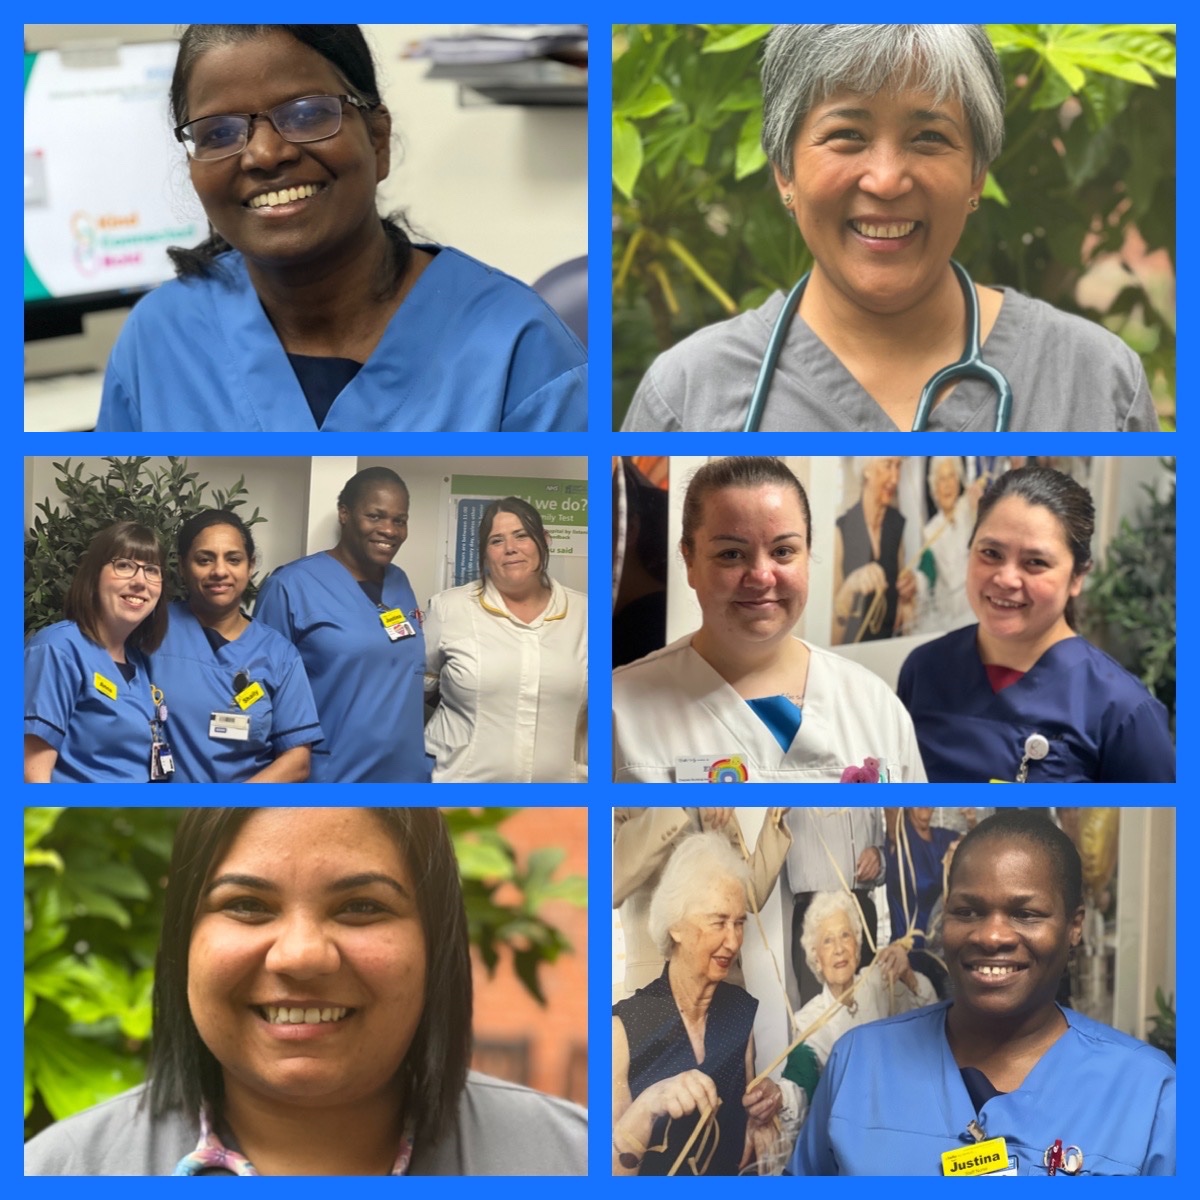 This week we are celebrating Nurses Week!! So proud of all our wonderful nurses! You are all truly amazing!! 💙 @uhbtrust